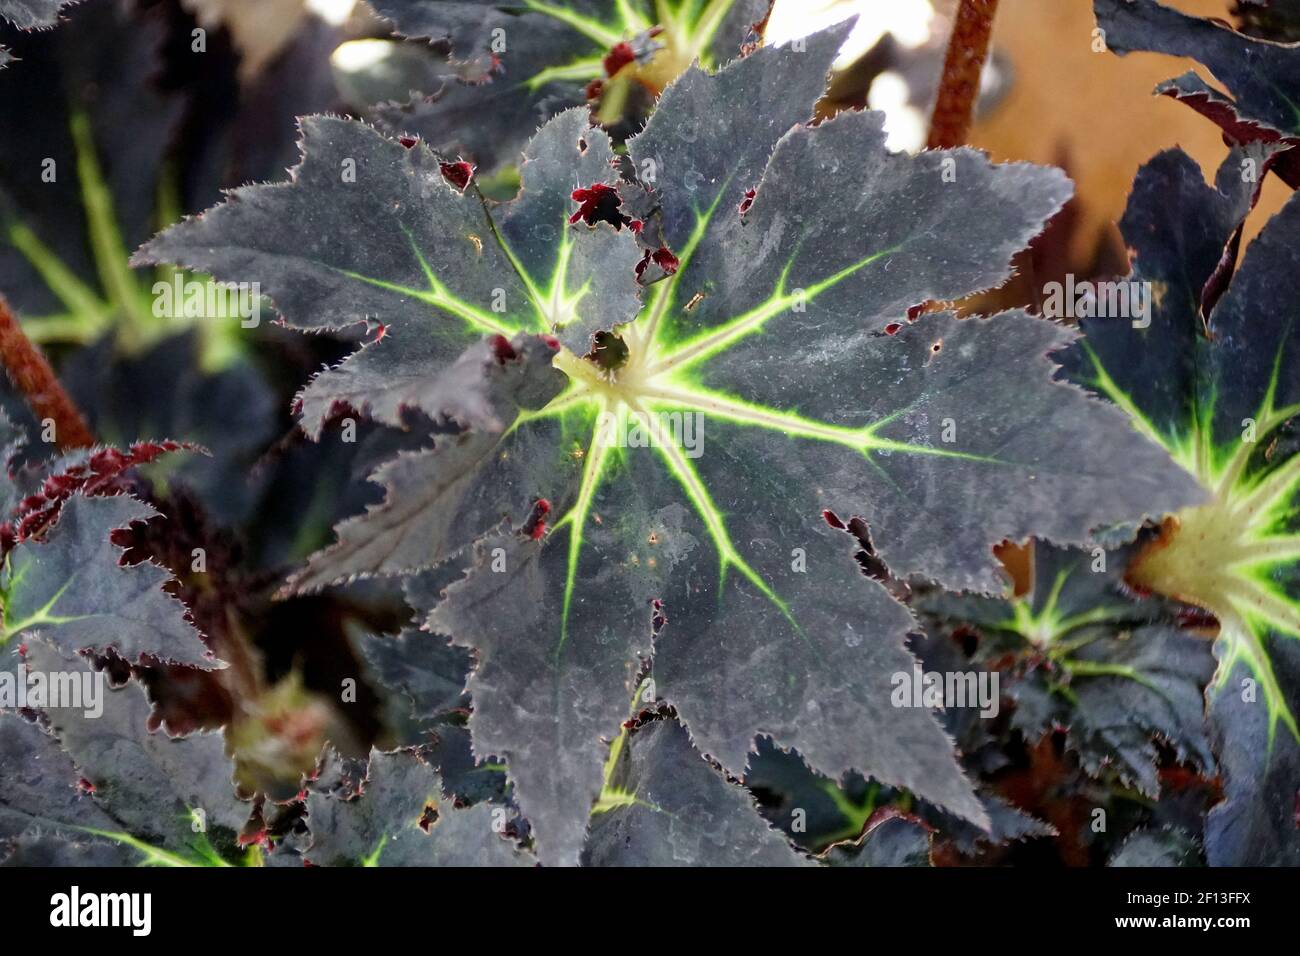 The dark leaves of Begonia Black Fang tropical plant Stock Photo